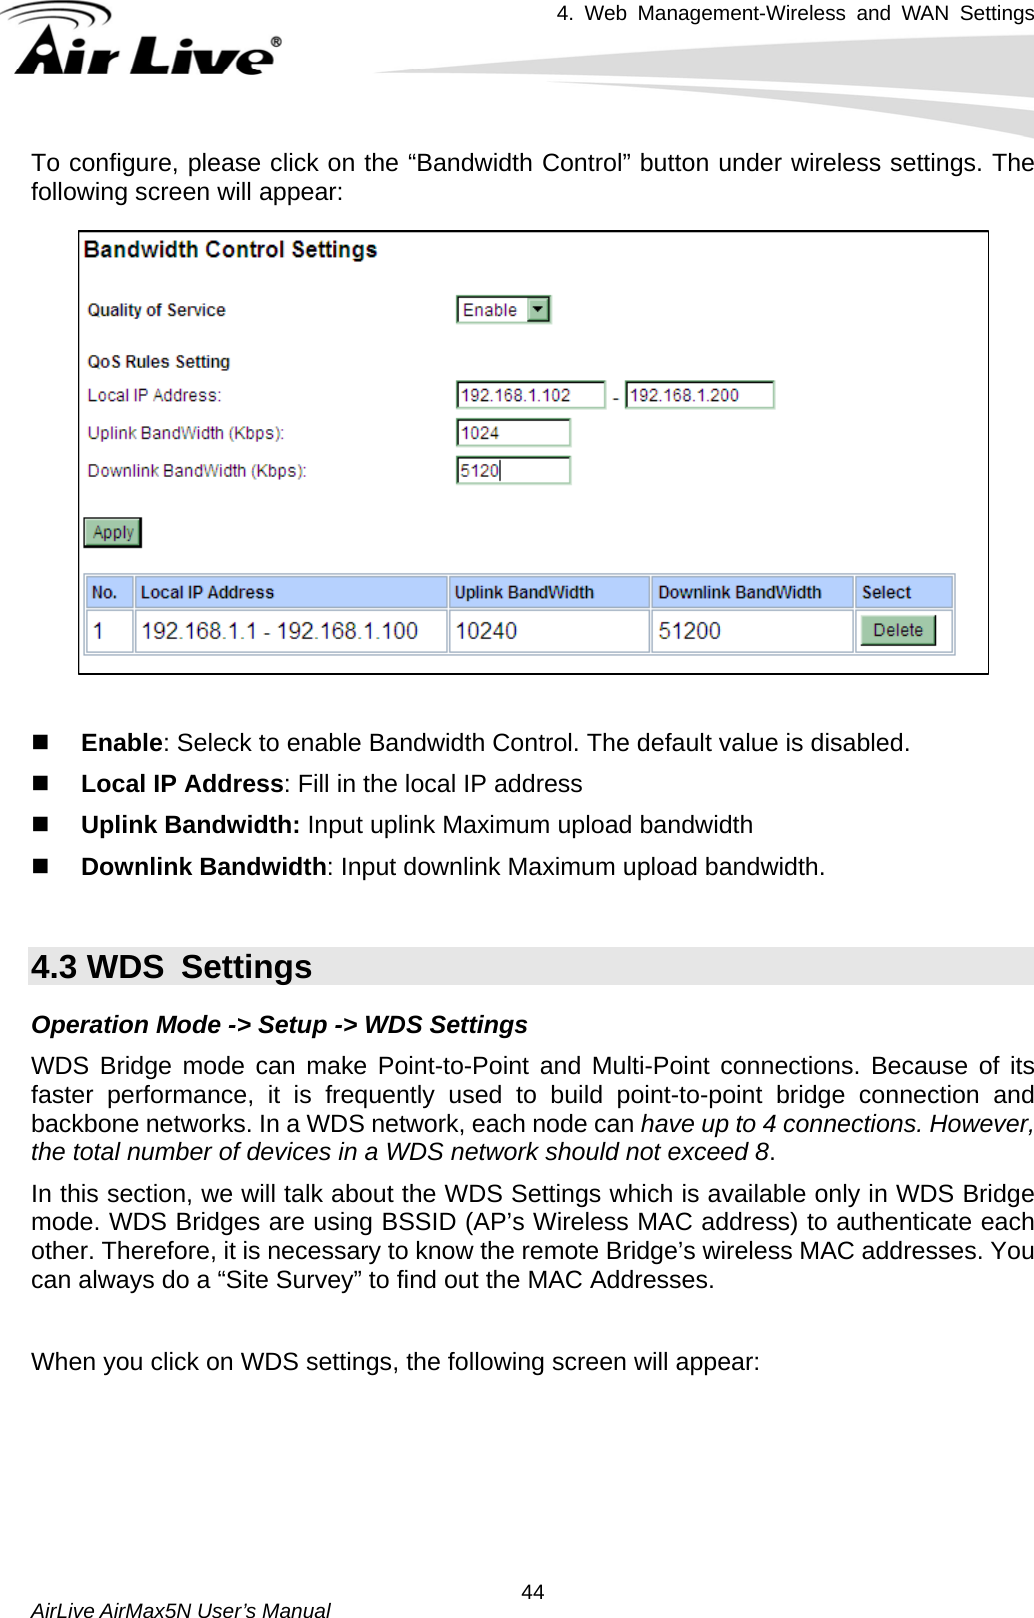 4. Web Management-Wireless and WAN Settings   AirLive AirMax5N User’s Manual  44To configure, please click on the “Bandwidth Control” button under wireless settings. The following screen will appear:    Enable: Seleck to enable Bandwidth Control. The default value is disabled.  Local IP Address: Fill in the local IP address  Uplink Bandwidth: Input uplink Maximum upload bandwidth  Downlink Bandwidth: Input downlink Maximum upload bandwidth.  4.3 WDS  Settings Operation Mode -&gt; Setup -&gt; WDS Settings WDS Bridge mode can make Point-to-Point and Multi-Point connections. Because of its faster performance, it is frequently used to build point-to-point bridge connection and backbone networks. In a WDS network, each node can have up to 4 connections. However, the total number of devices in a WDS network should not exceed 8.  In this section, we will talk about the WDS Settings which is available only in WDS Bridge mode. WDS Bridges are using BSSID (AP’s Wireless MAC address) to authenticate each other. Therefore, it is necessary to know the remote Bridge’s wireless MAC addresses. You can always do a “Site Survey” to find out the MAC Addresses.  When you click on WDS settings, the following screen will appear:  